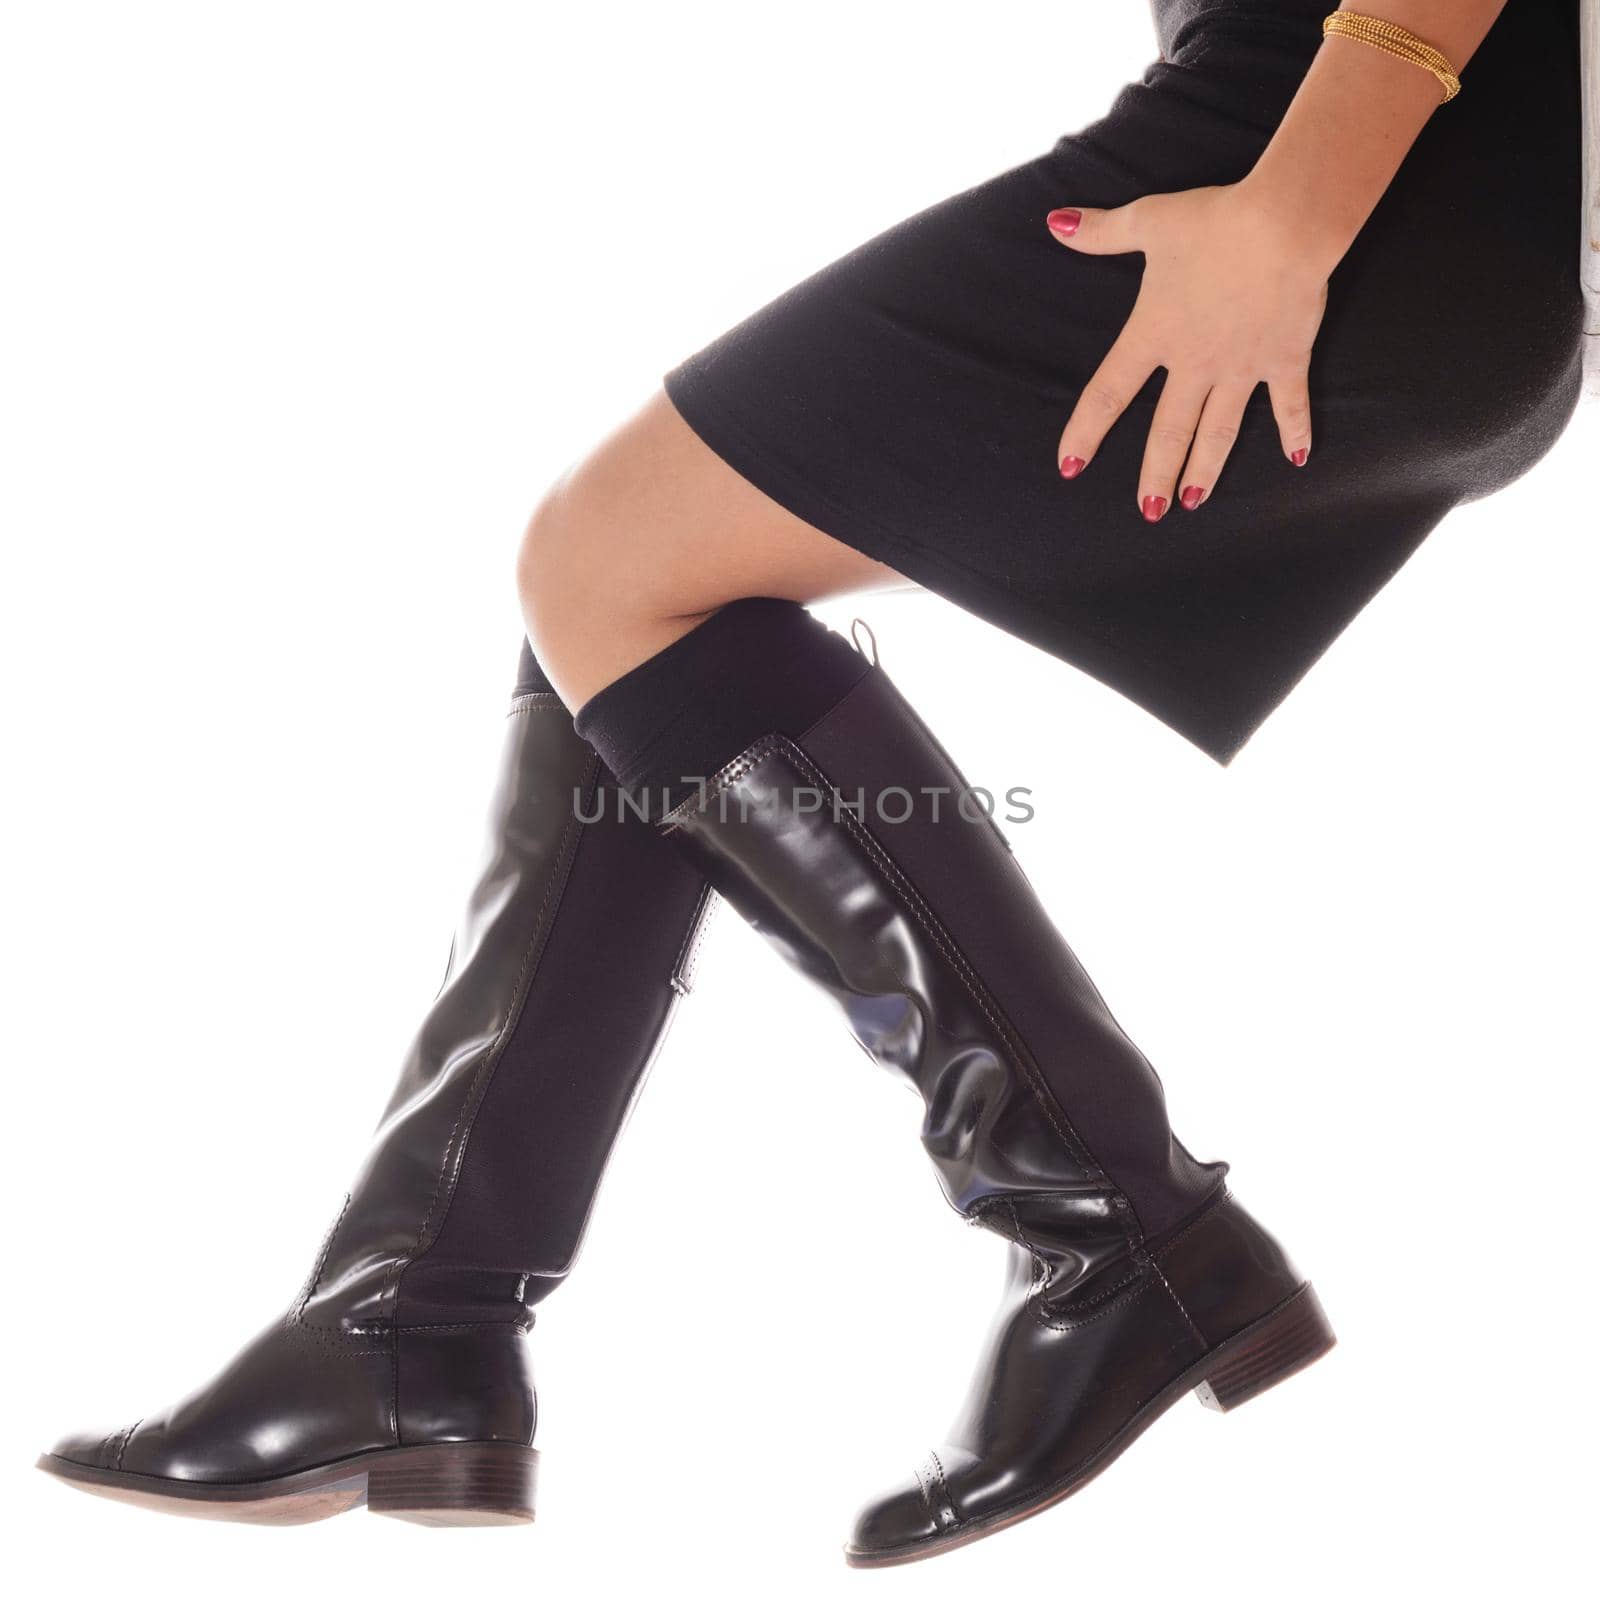 Female legs in high brown leather boots isolated on white